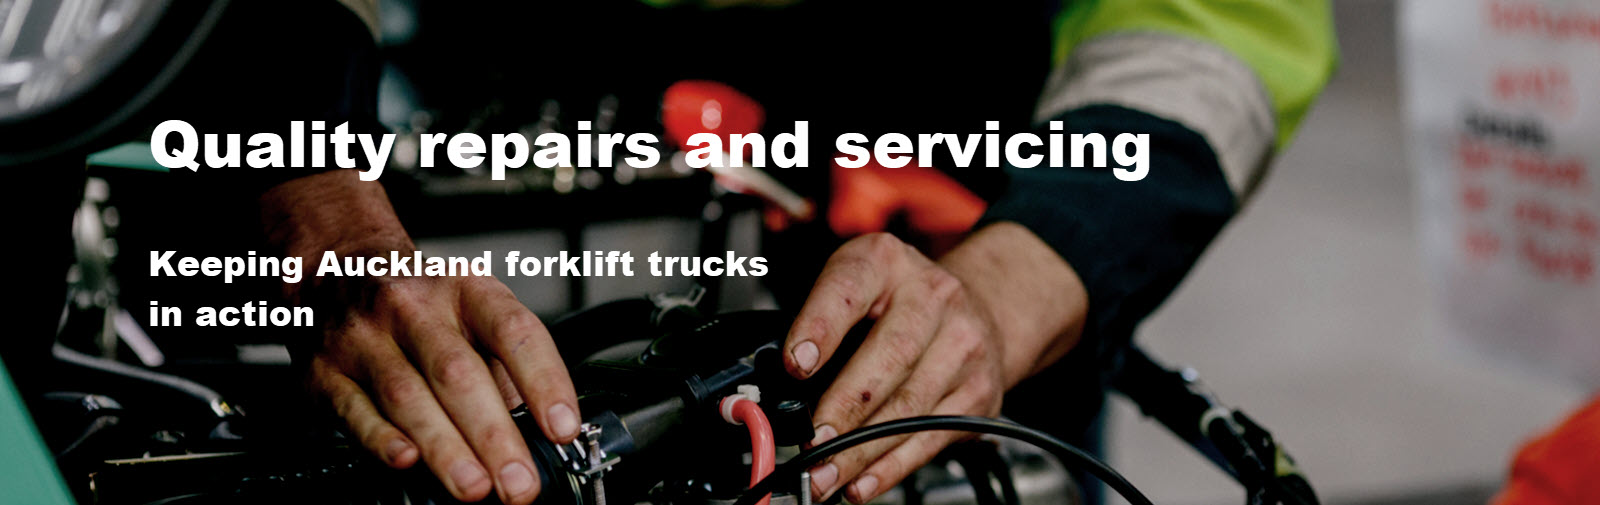 auckland repairs and servicing